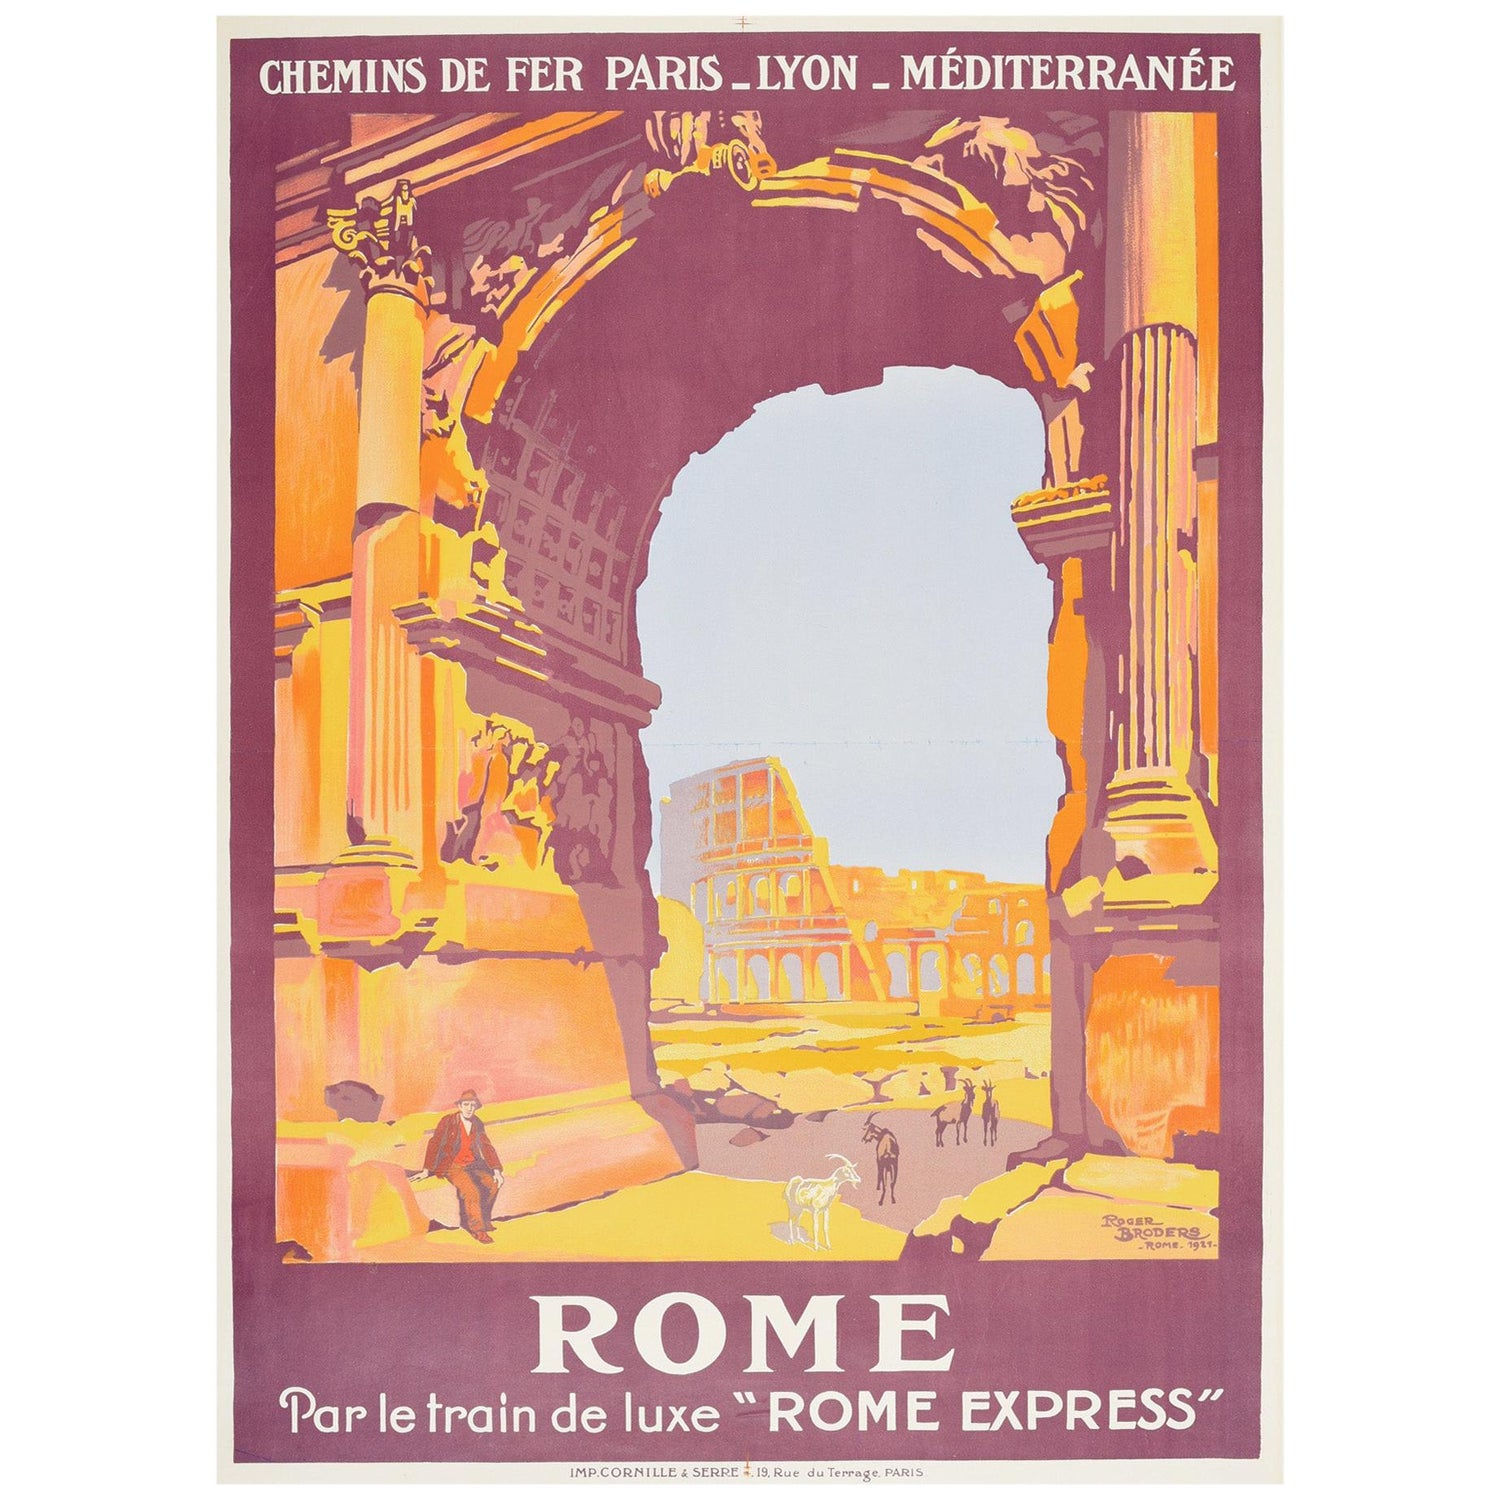 Original Art Deco Travel Poster by Roger Broders For Sale at 1stDibs